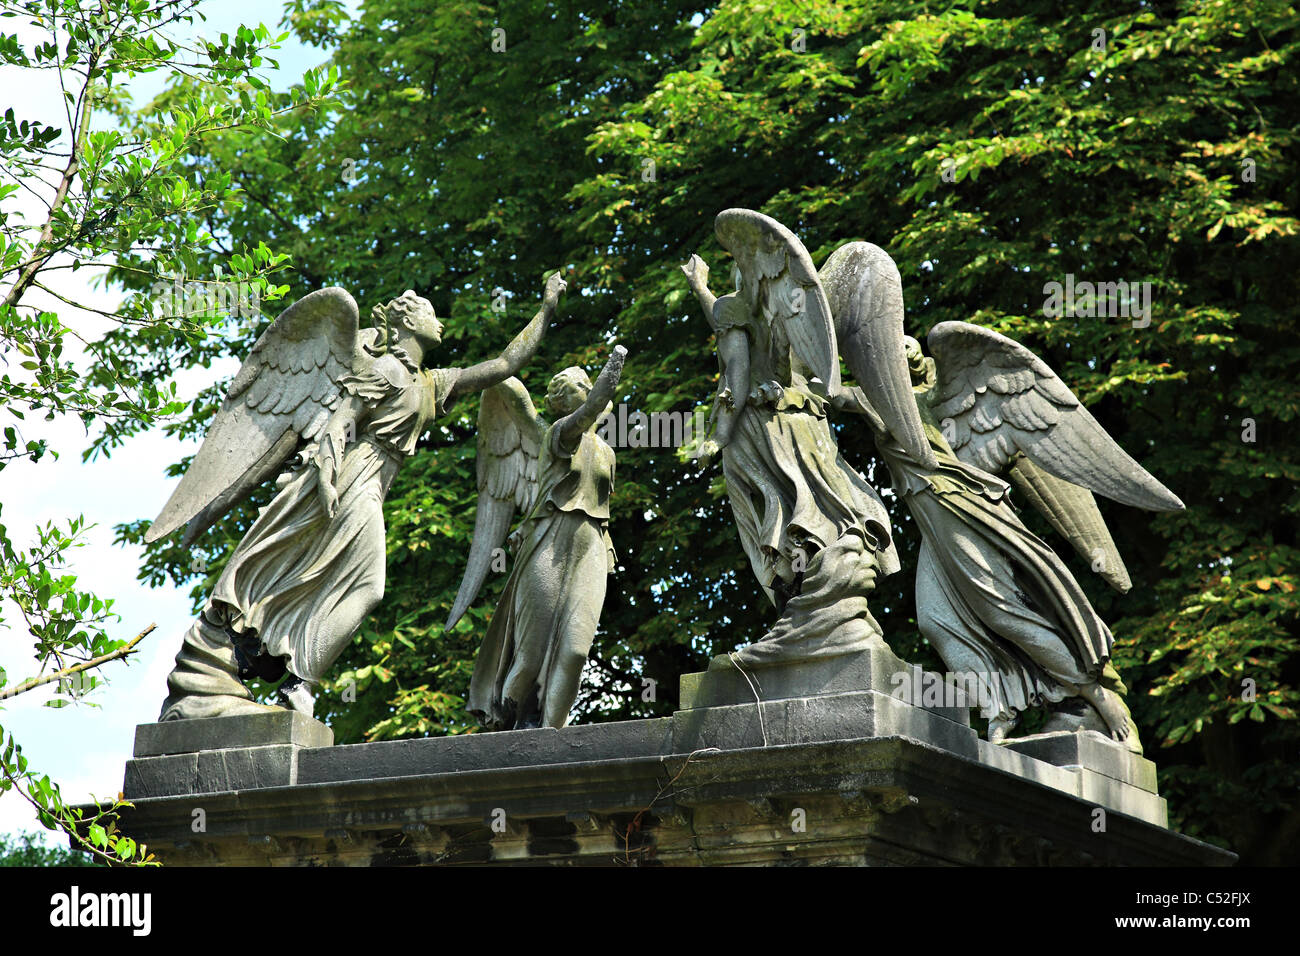 Mausoleum with Angels at Kensal Green cemetery, London, England Stock Photo